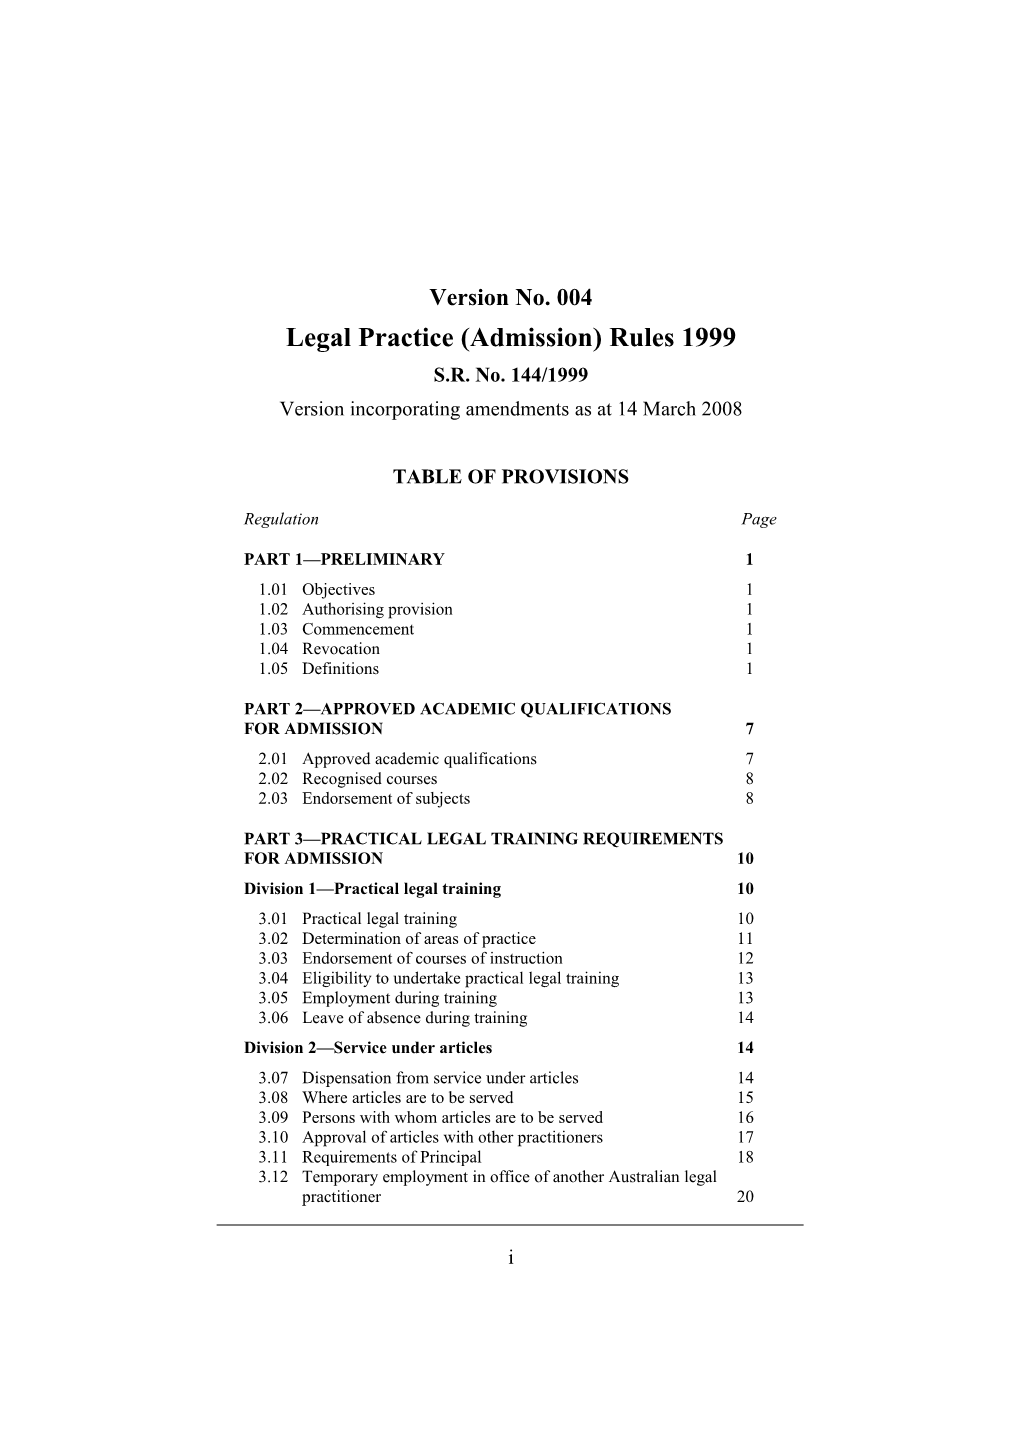 Legal Practice (Admission) Rules 1999